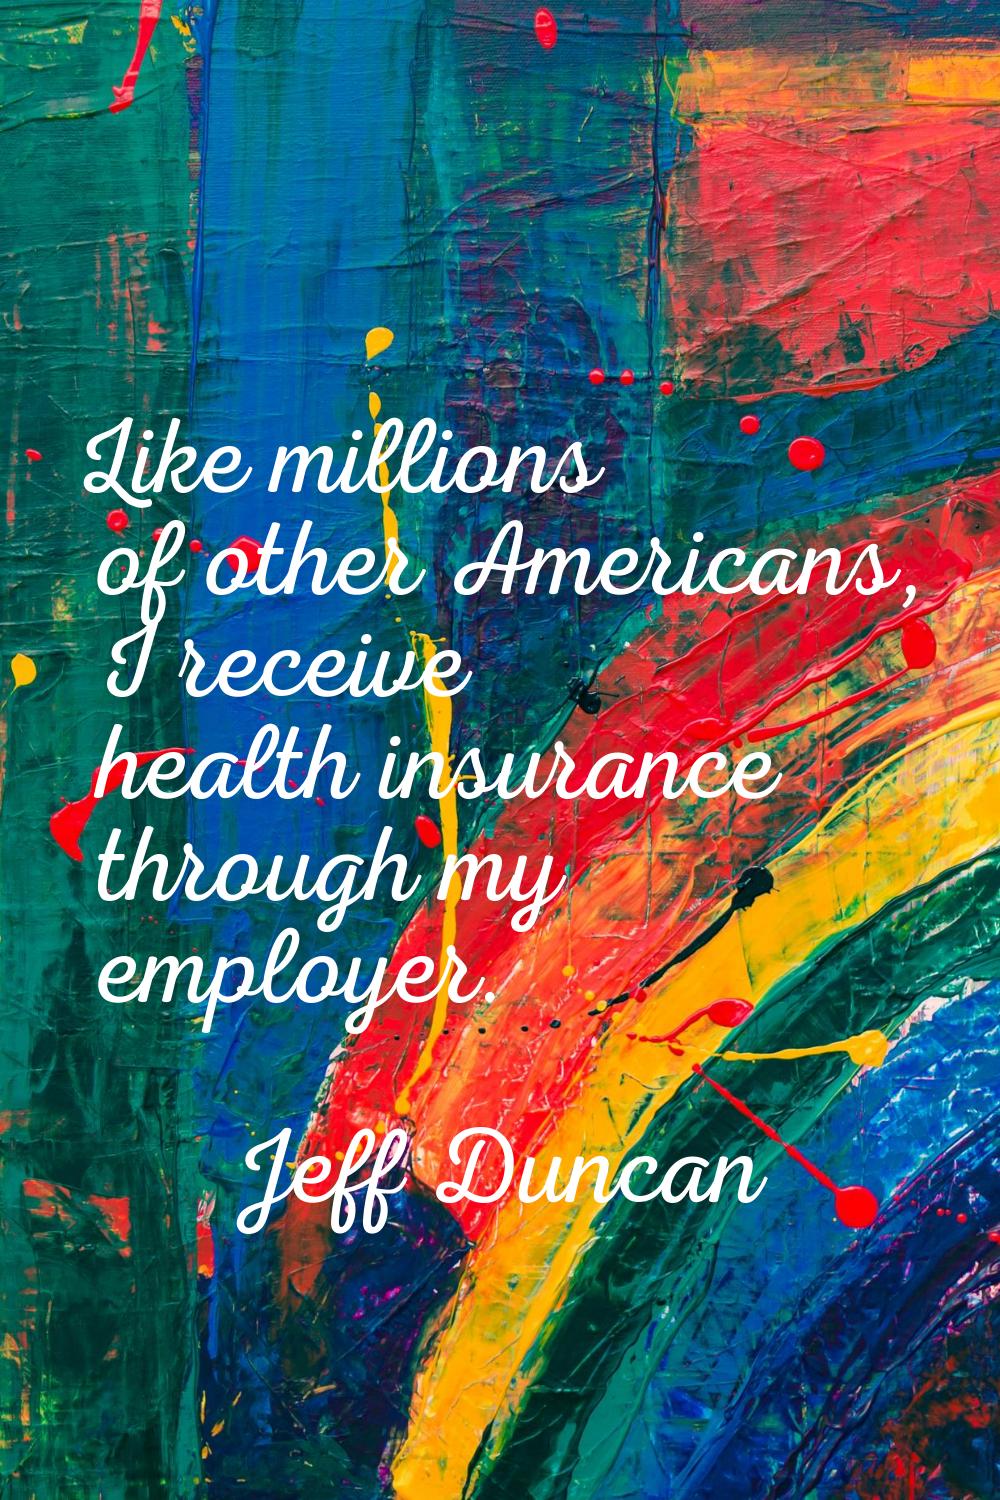 Like millions of other Americans, I receive health insurance through my employer.